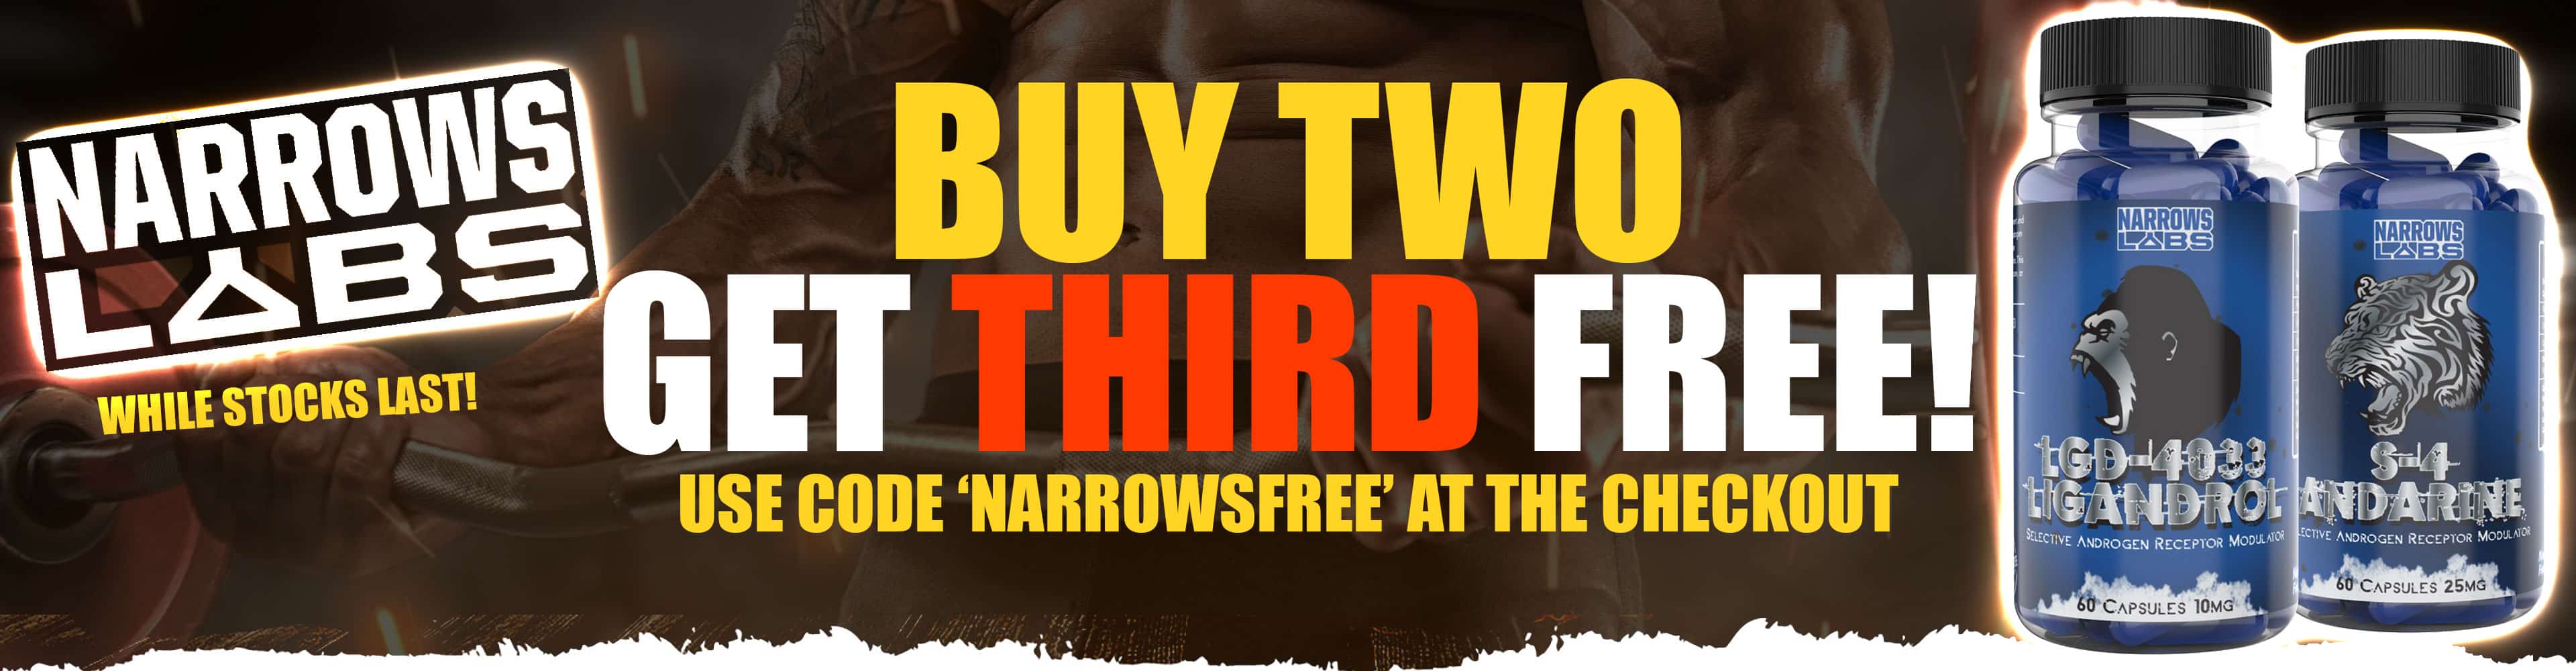 Narrows Labs Offer 3 For 2